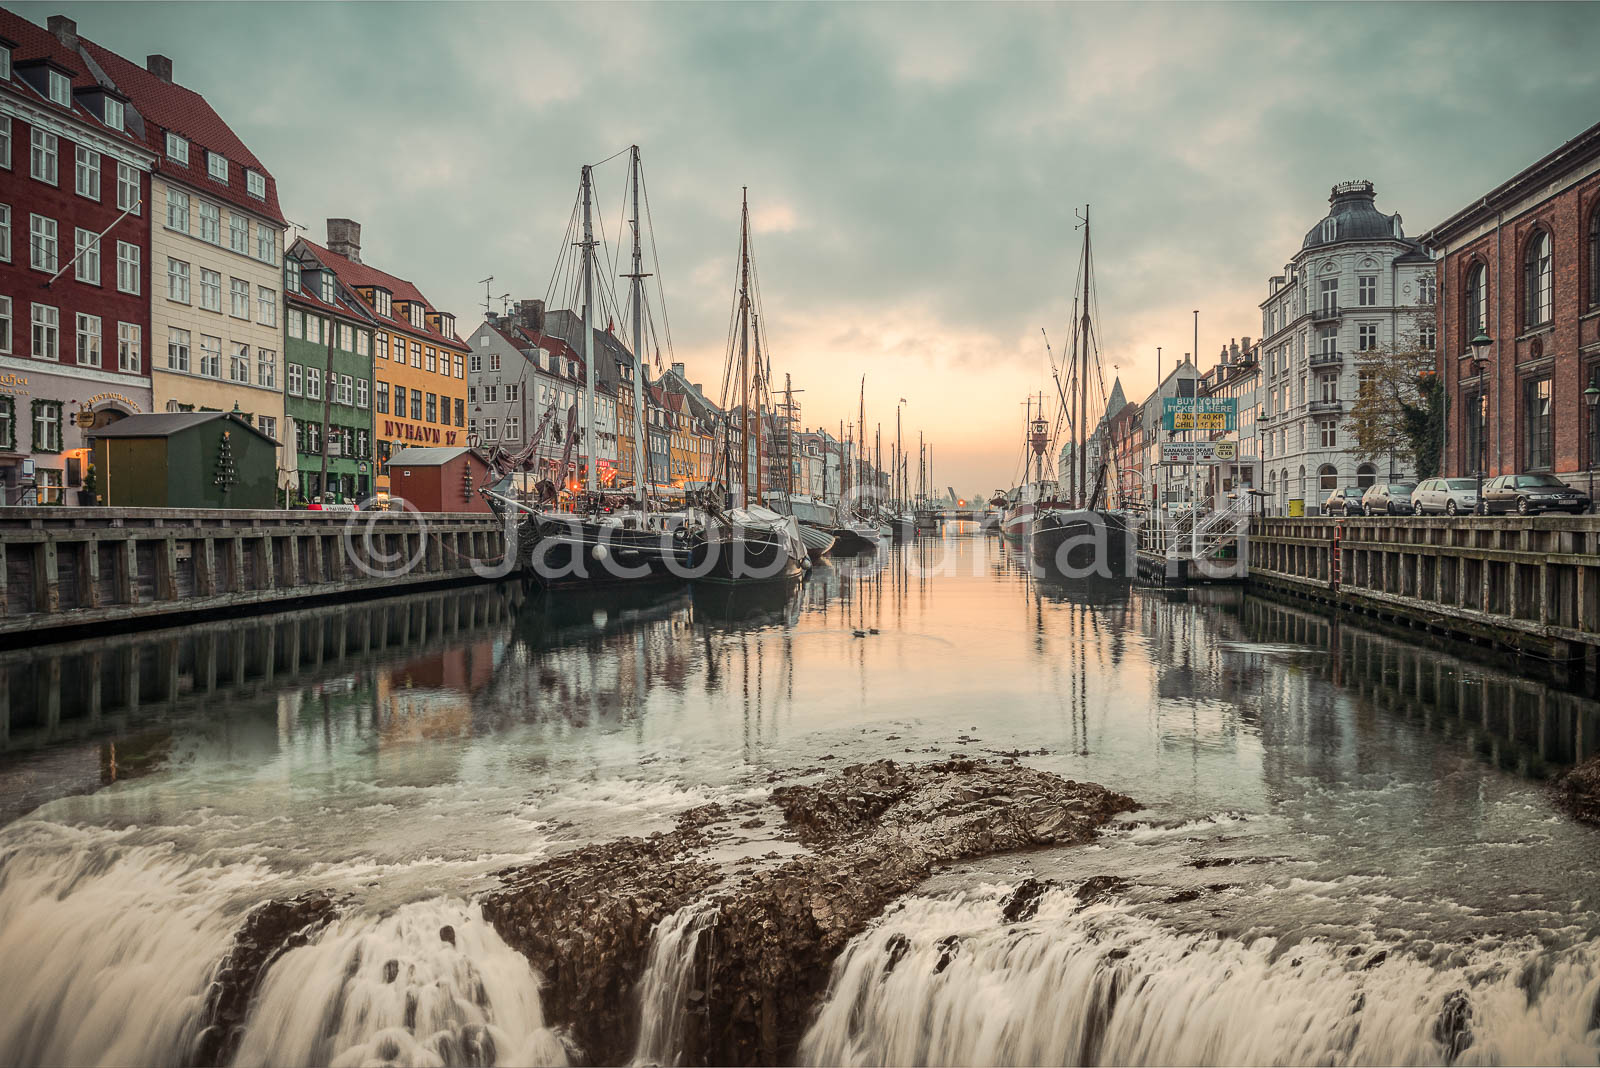 The water is runing out of Nyhavn. A composite surreal image.